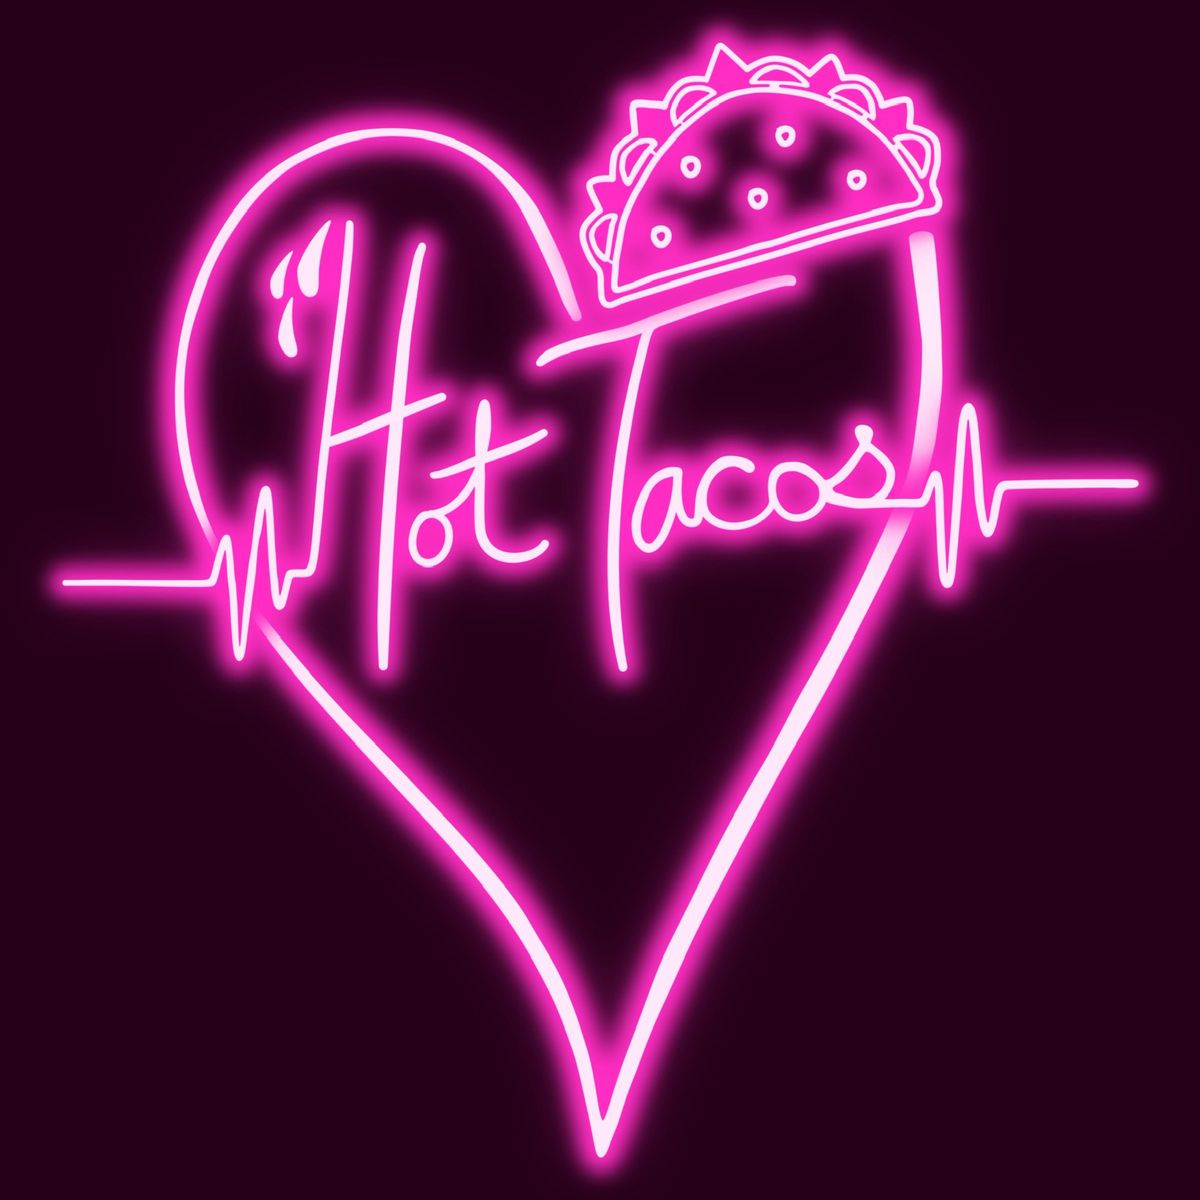 The logo for Hot Tacos